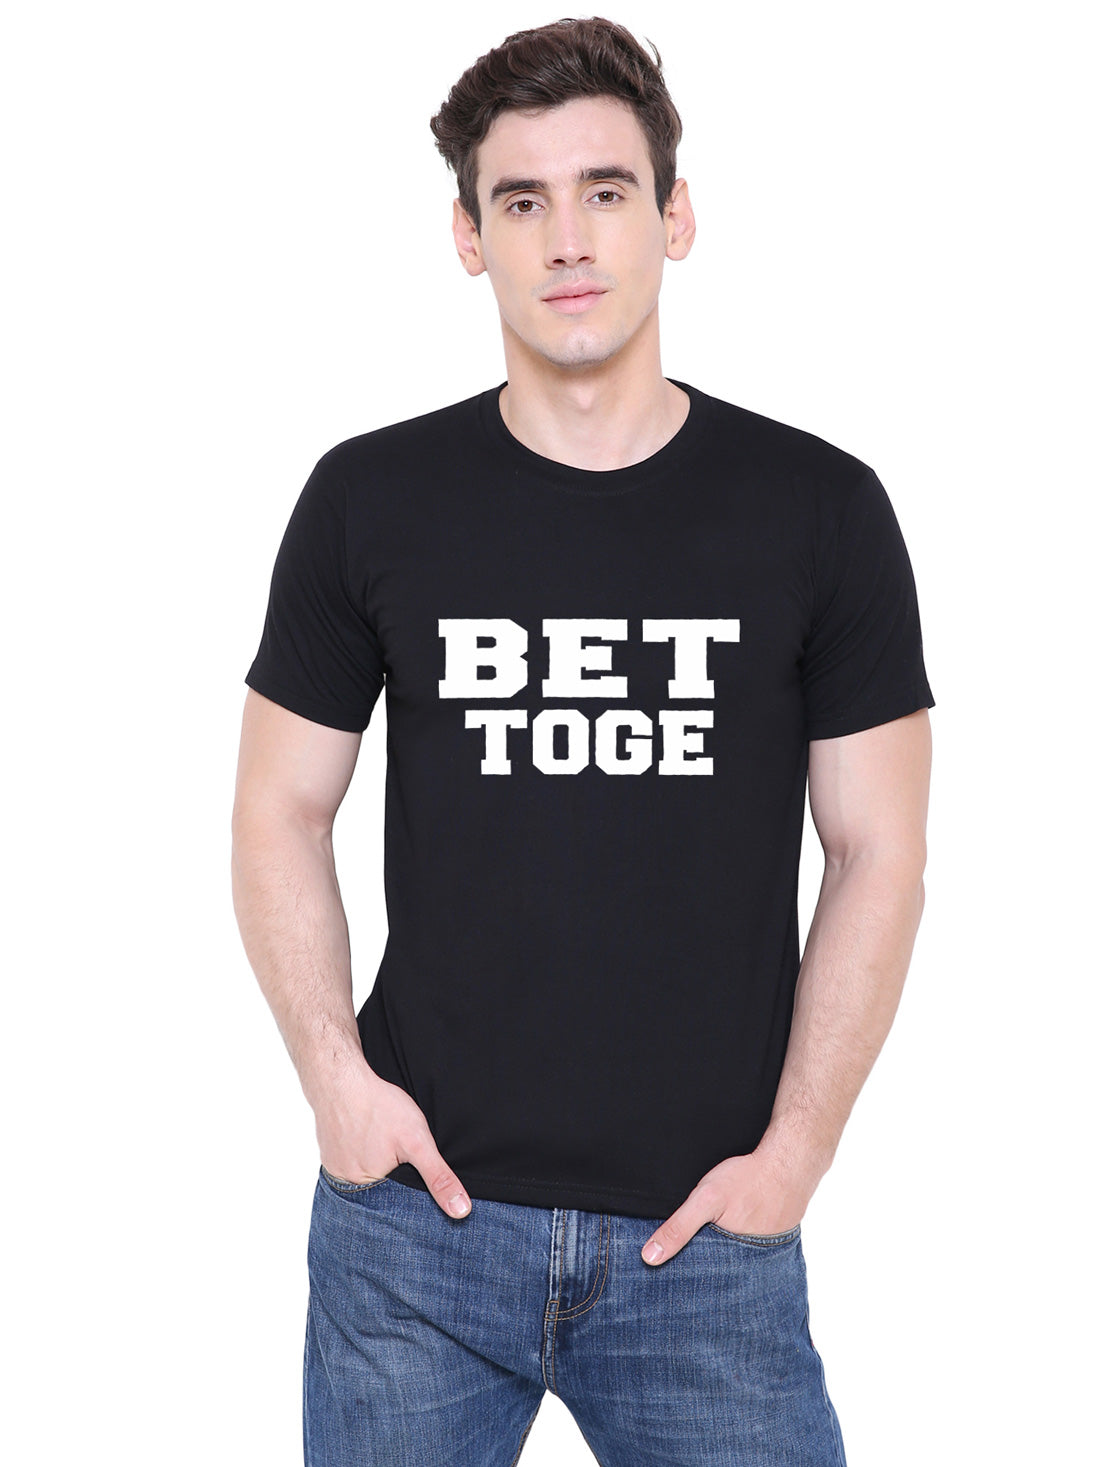 Better Together matching Couple T shirts- Black